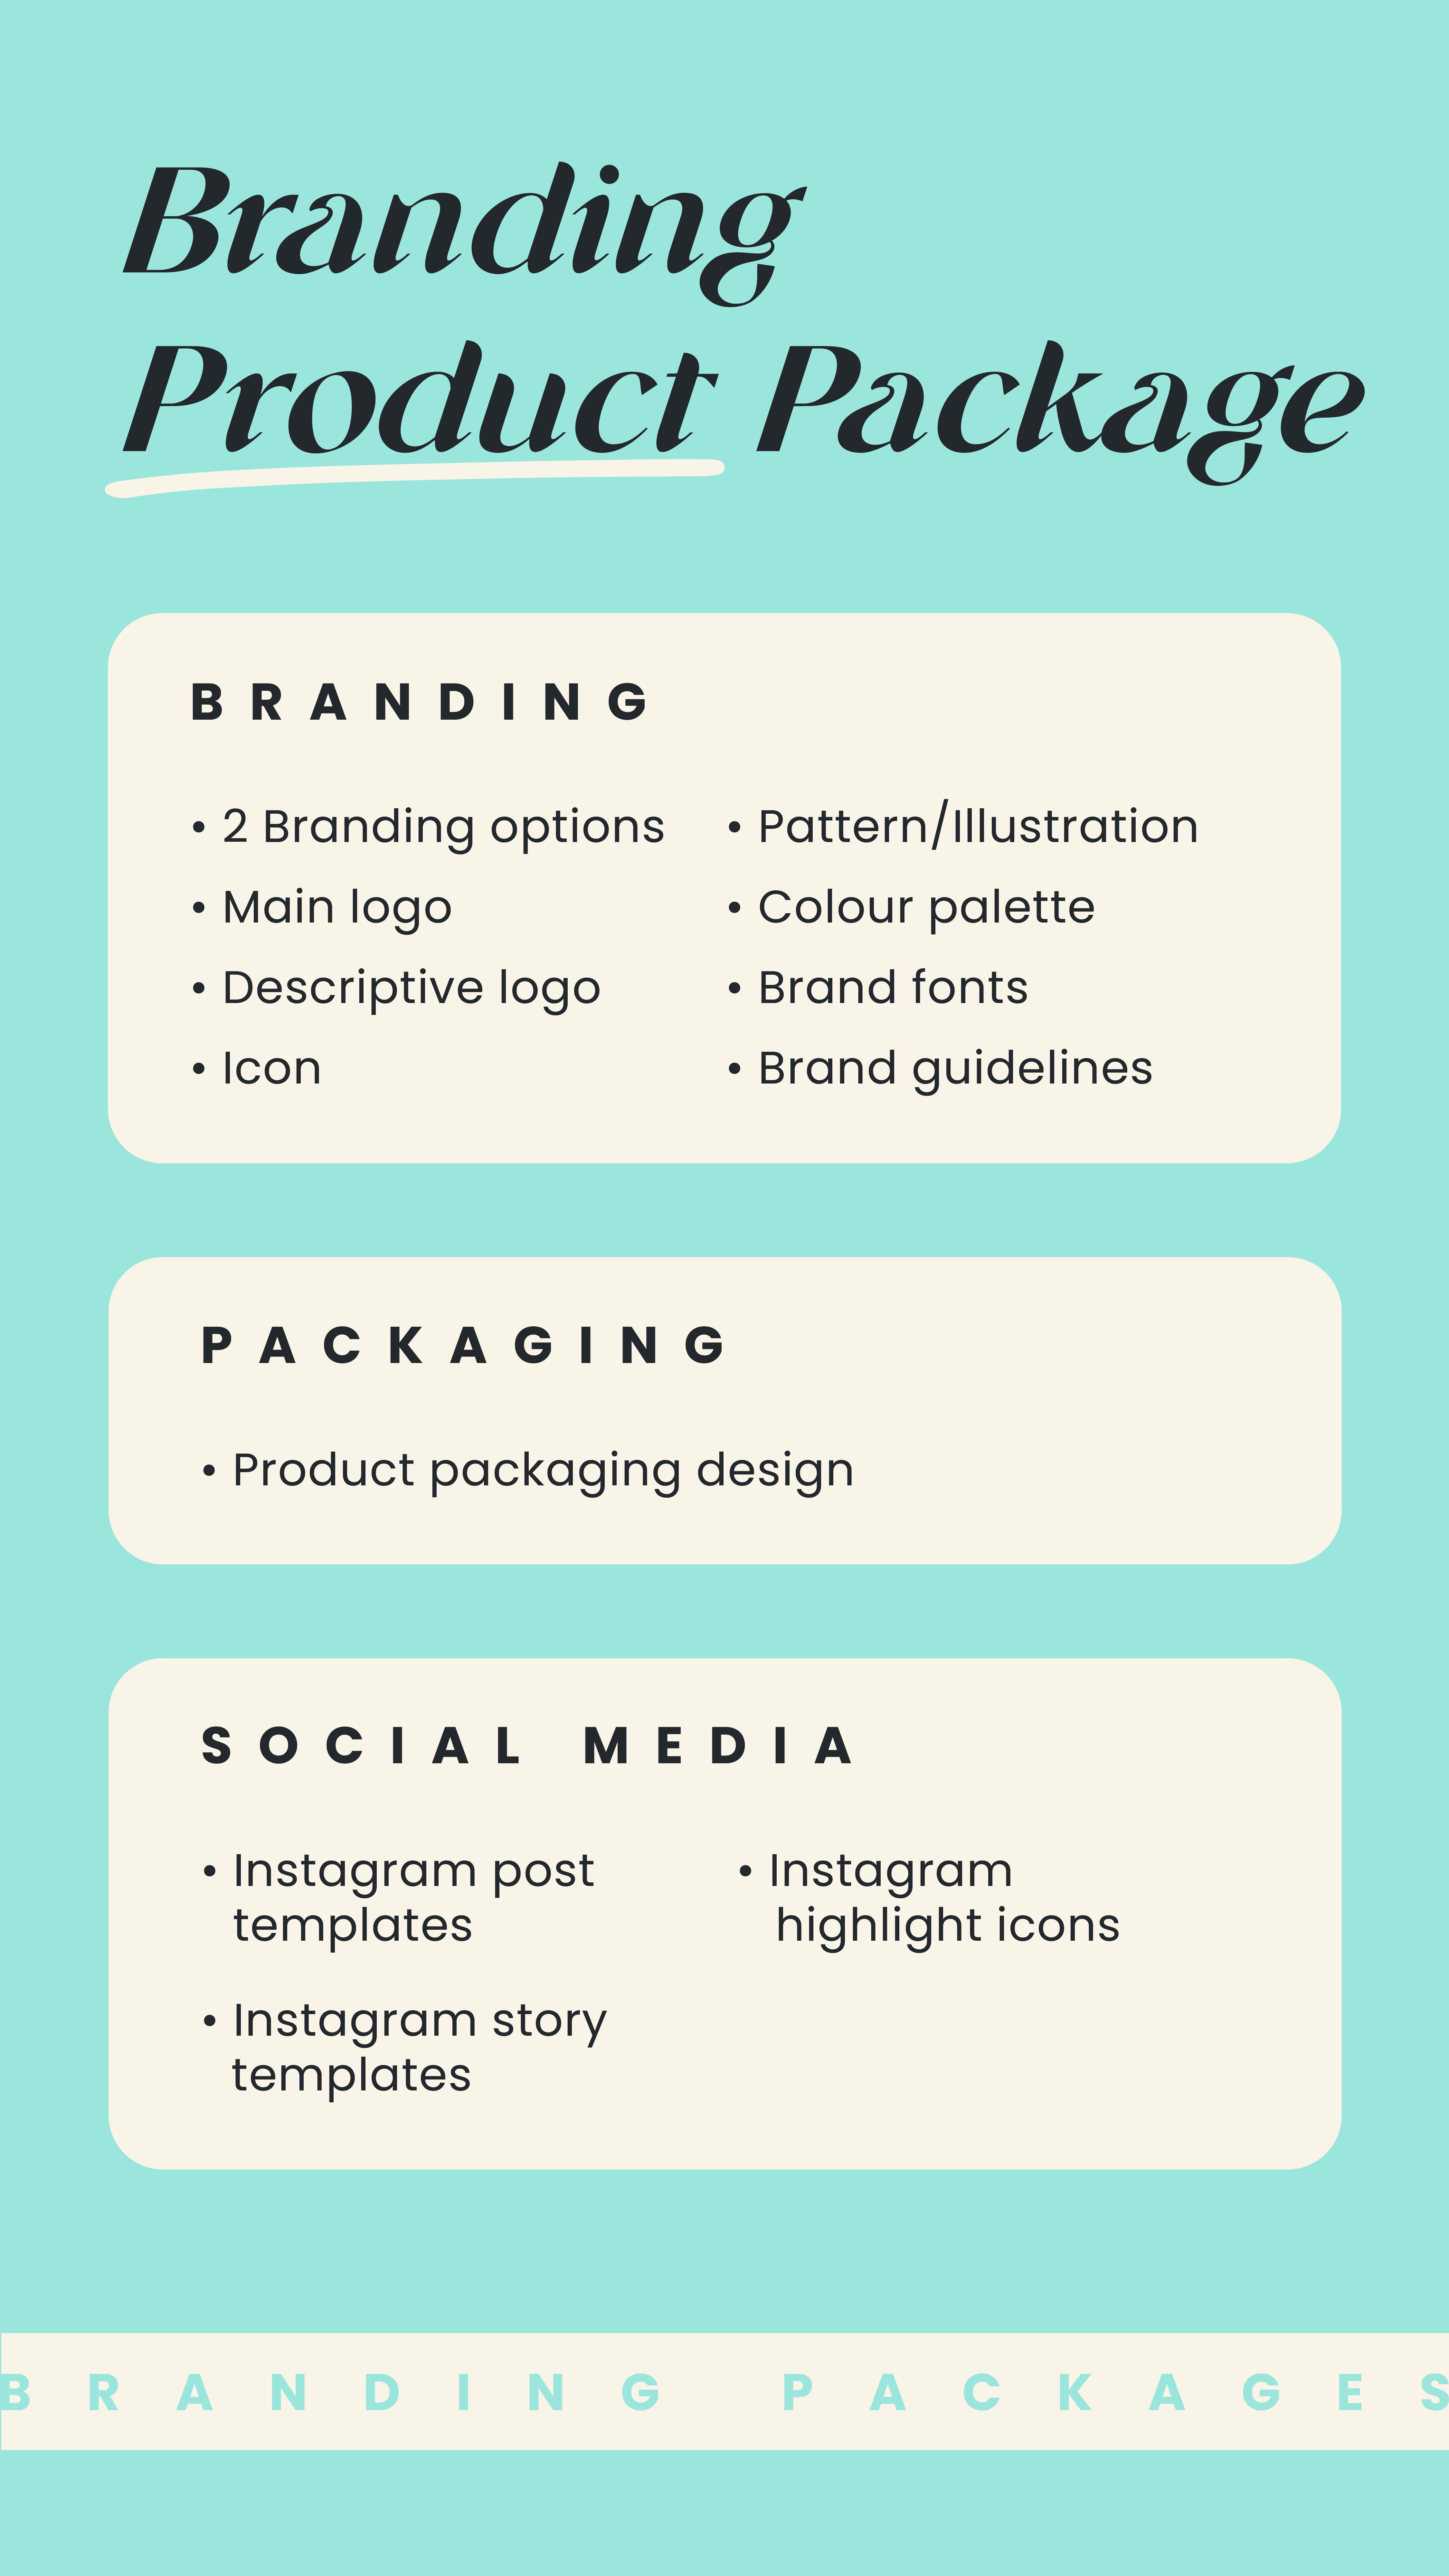 Branding Product Package